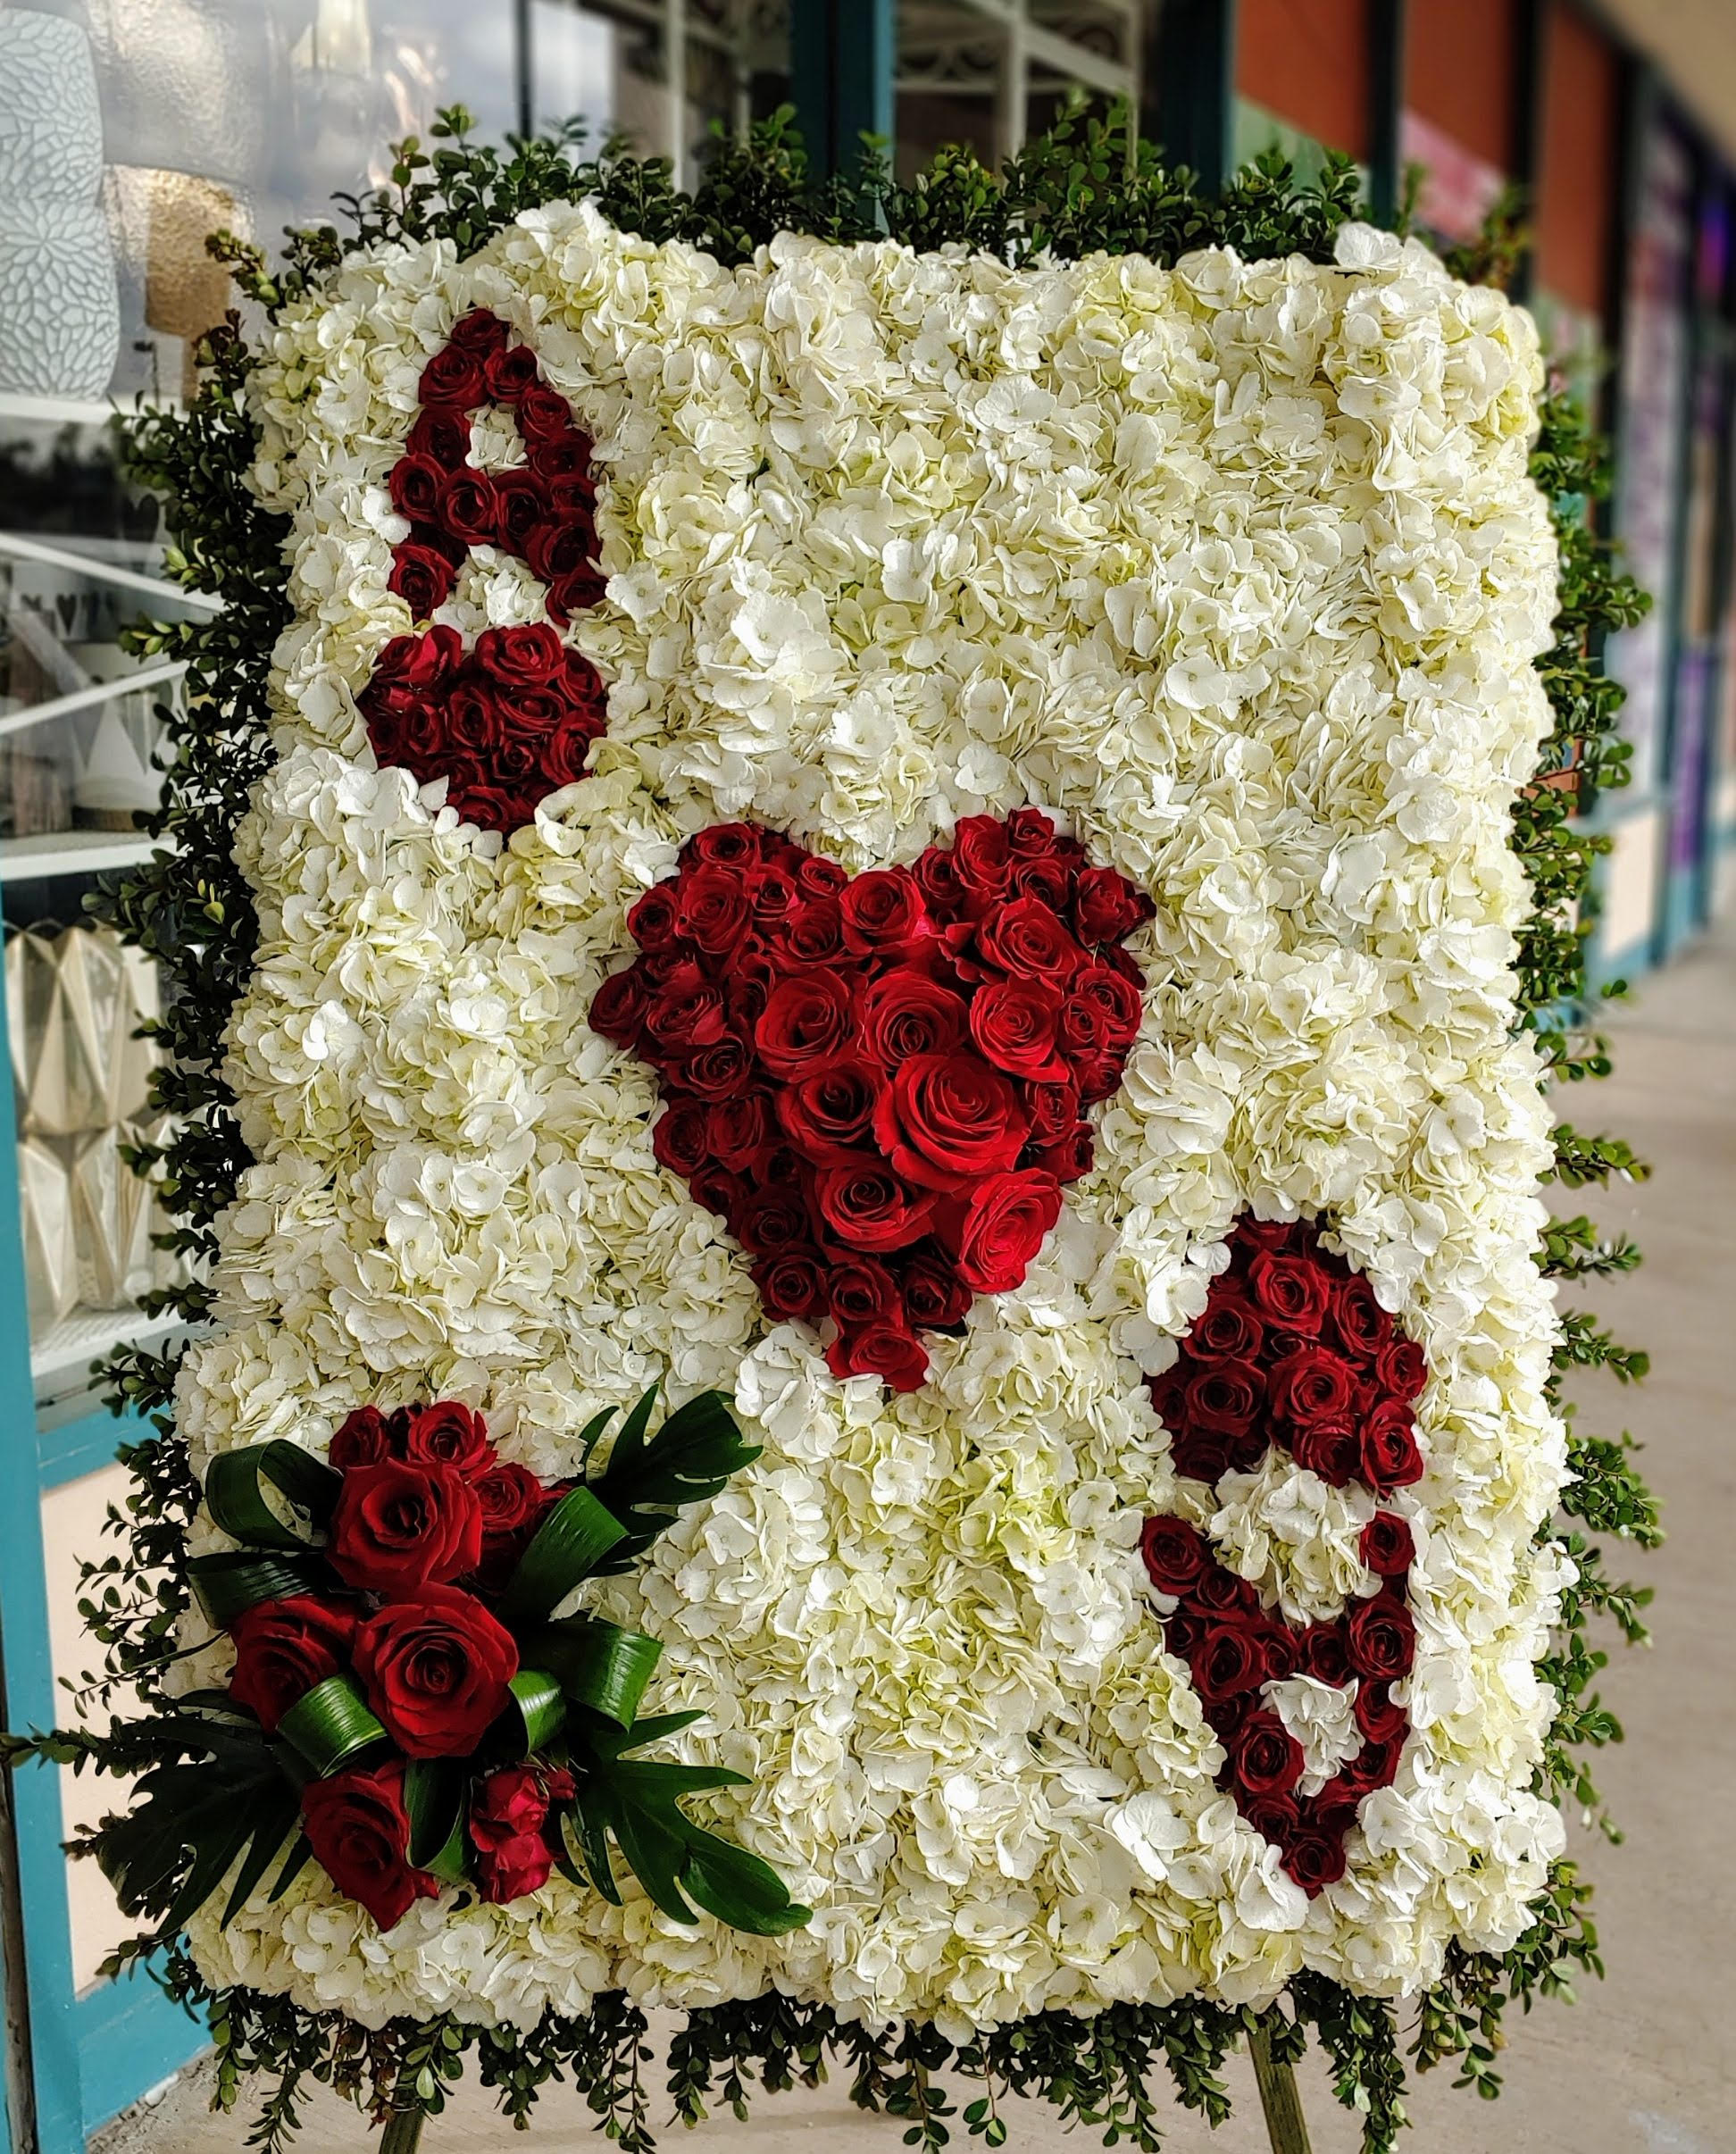 Ace Of Hearts Tribute - An ace of hearts tribute in roses and carnations. This piece measures approximately 24 by 32 inches.